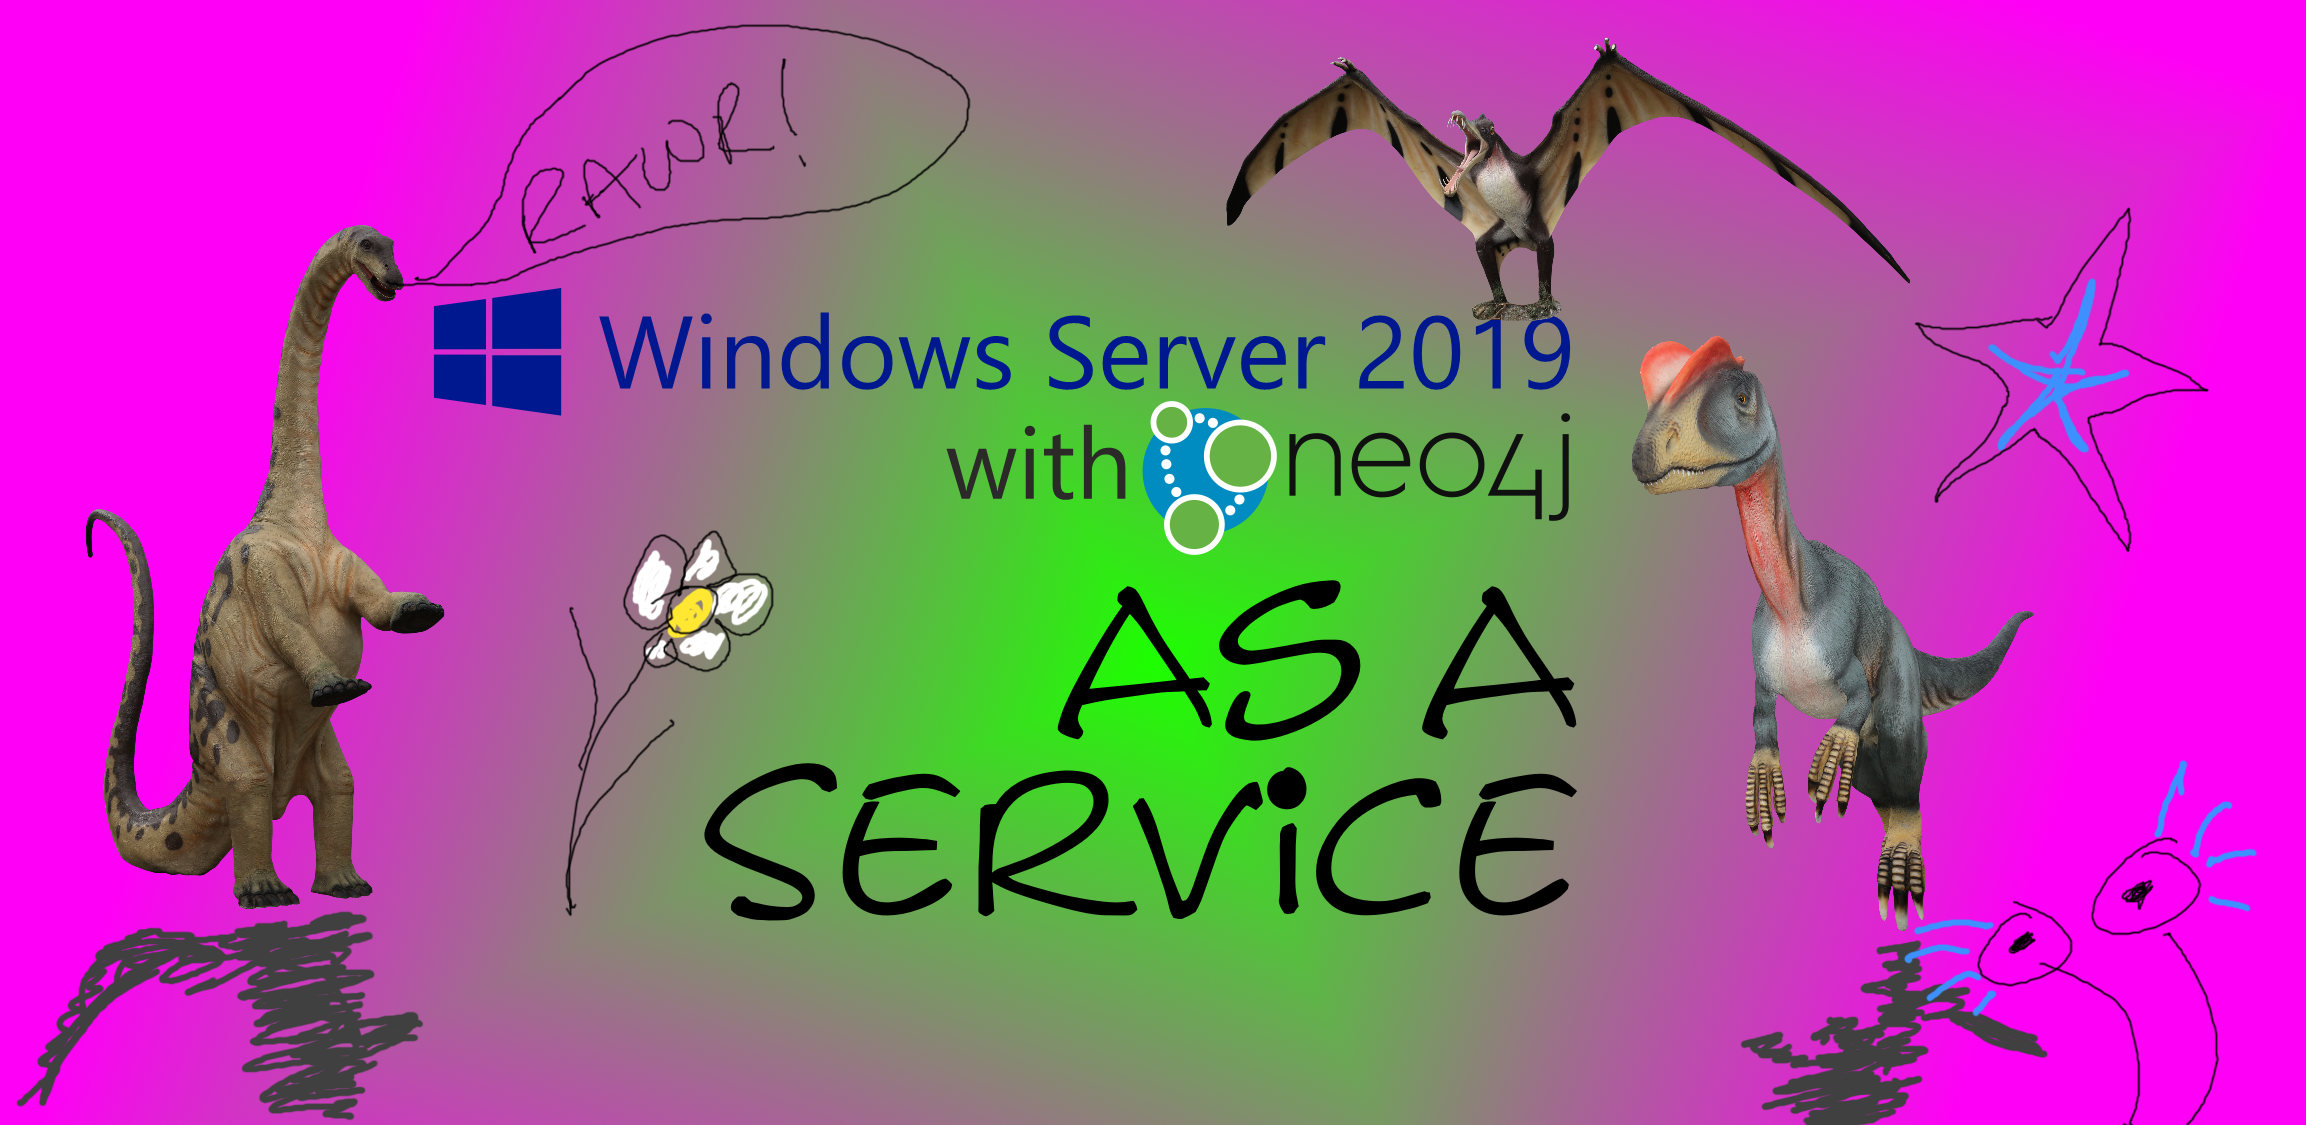 Windows Server 2019 with Neo4j as a service. There are spurious dinosaurs on this. They add nothing, but it's a dry topic...